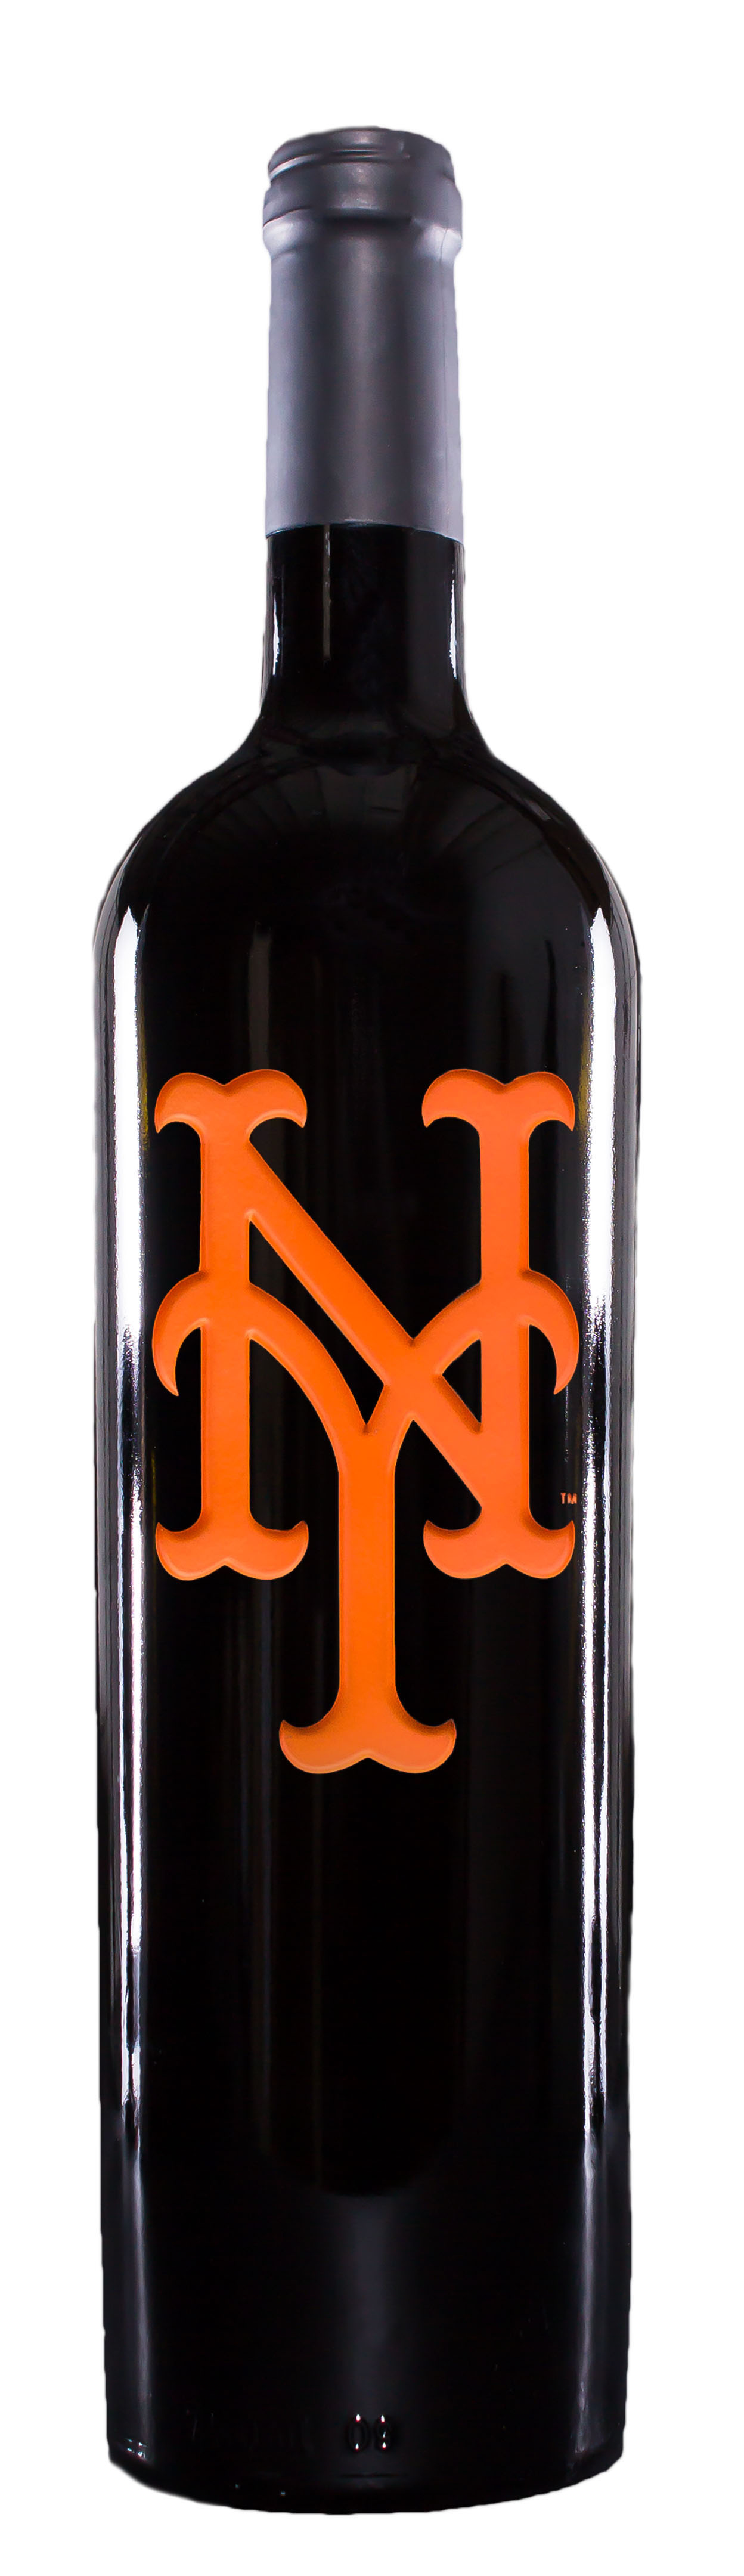 MLB Club Series - New York Mets - Etched Bottle Red Blend label